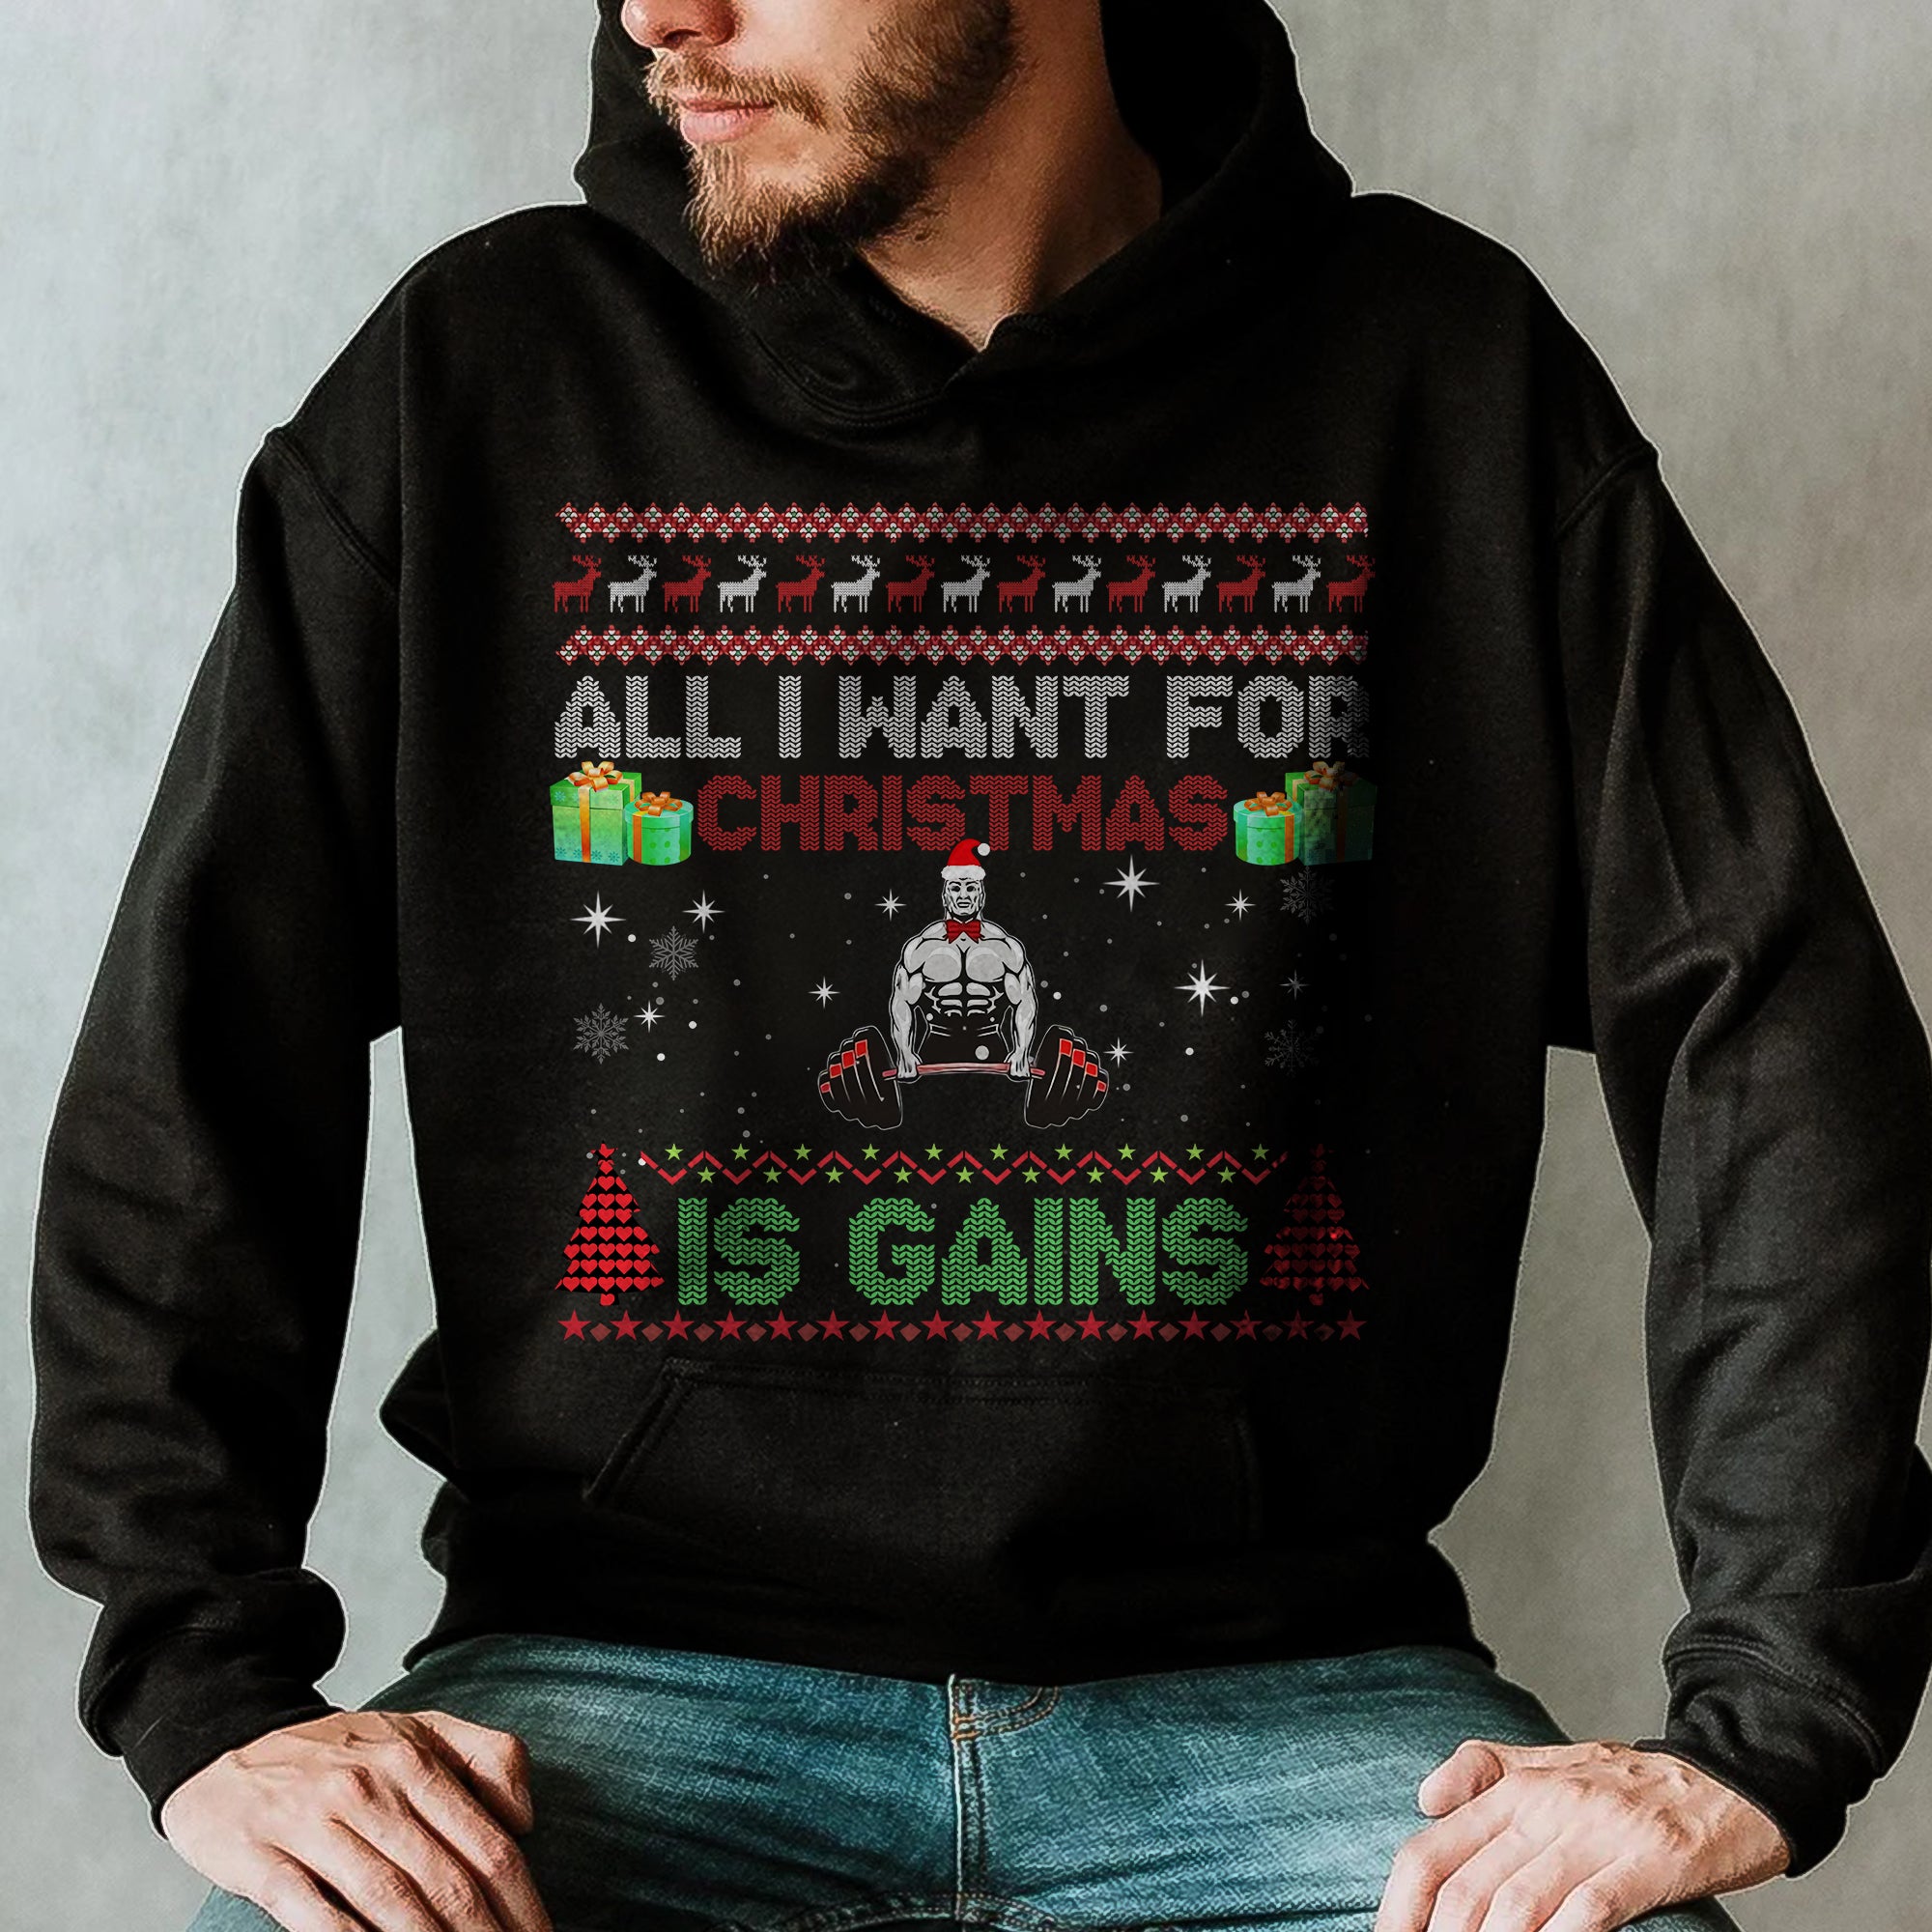 Gym Hoodie All I Want For Christmas Is Gains